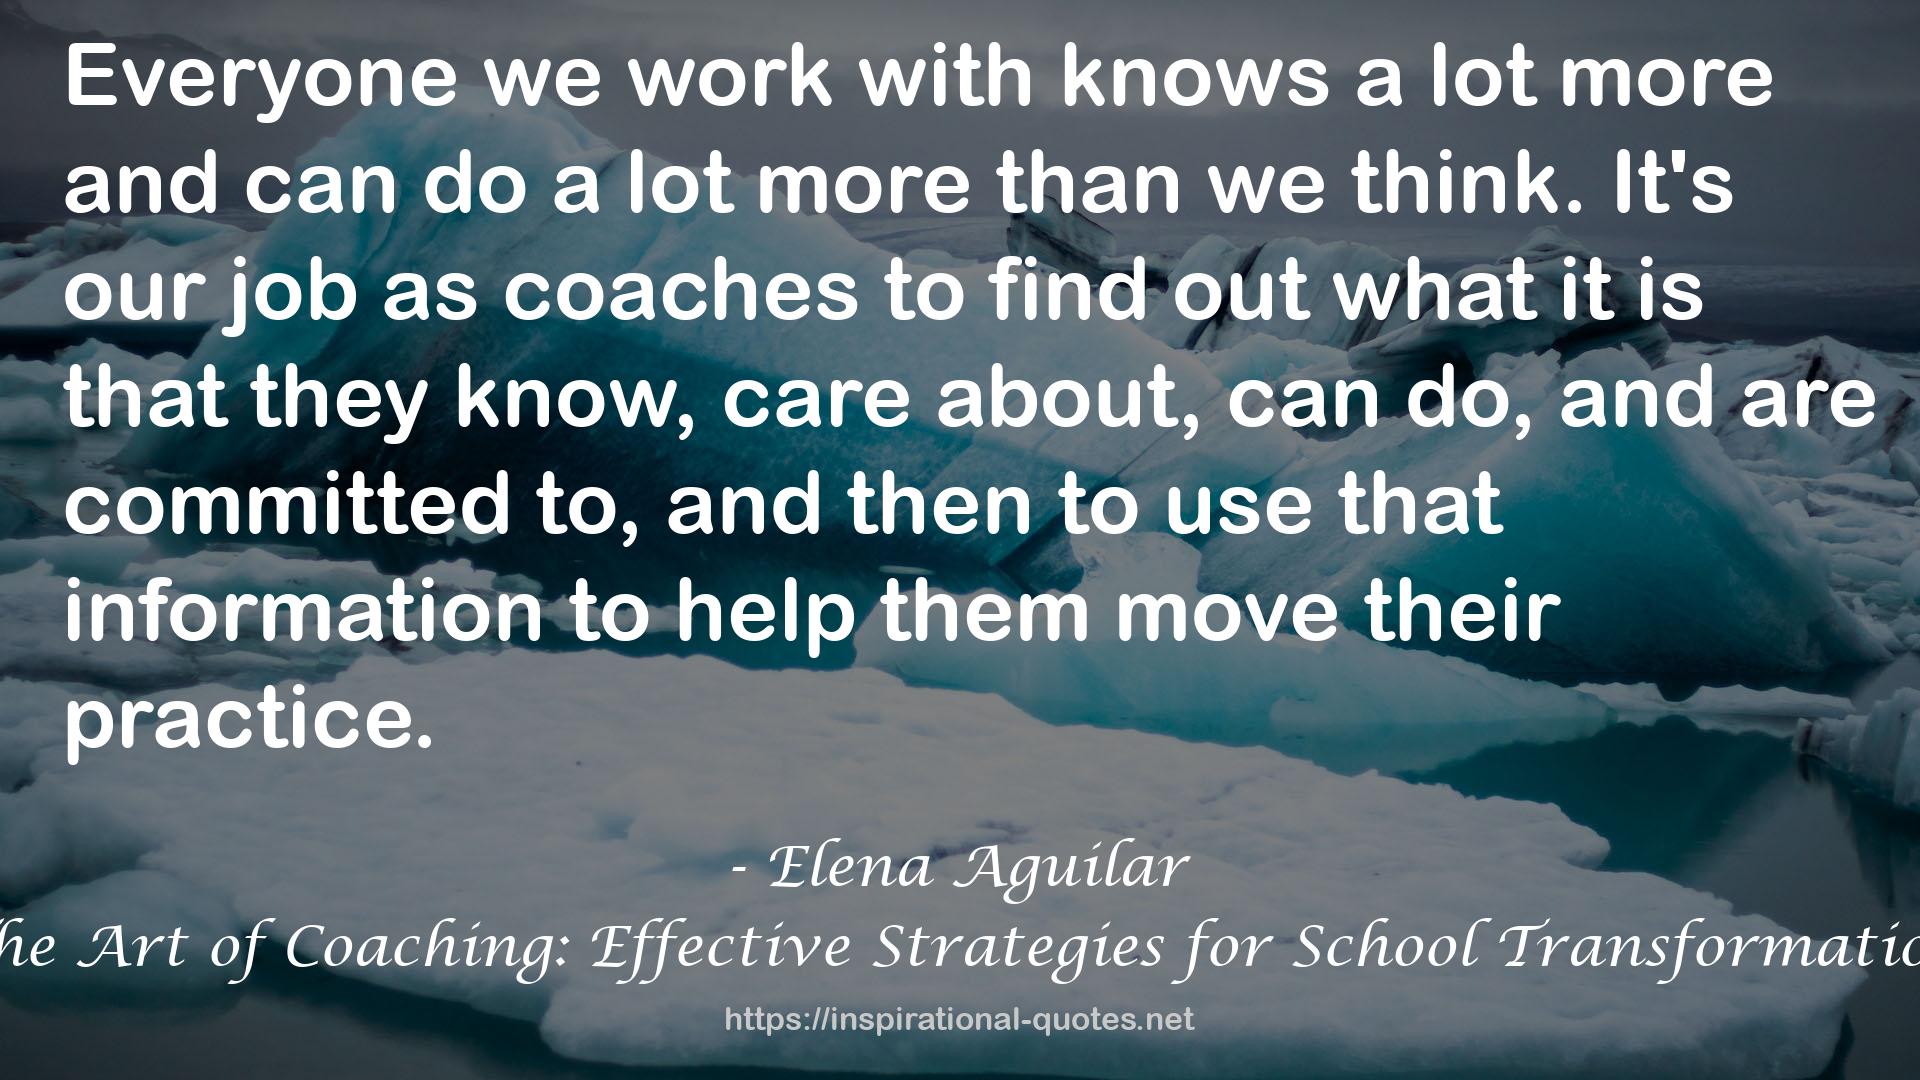 The Art of Coaching: Effective Strategies for School Transformation QUOTES